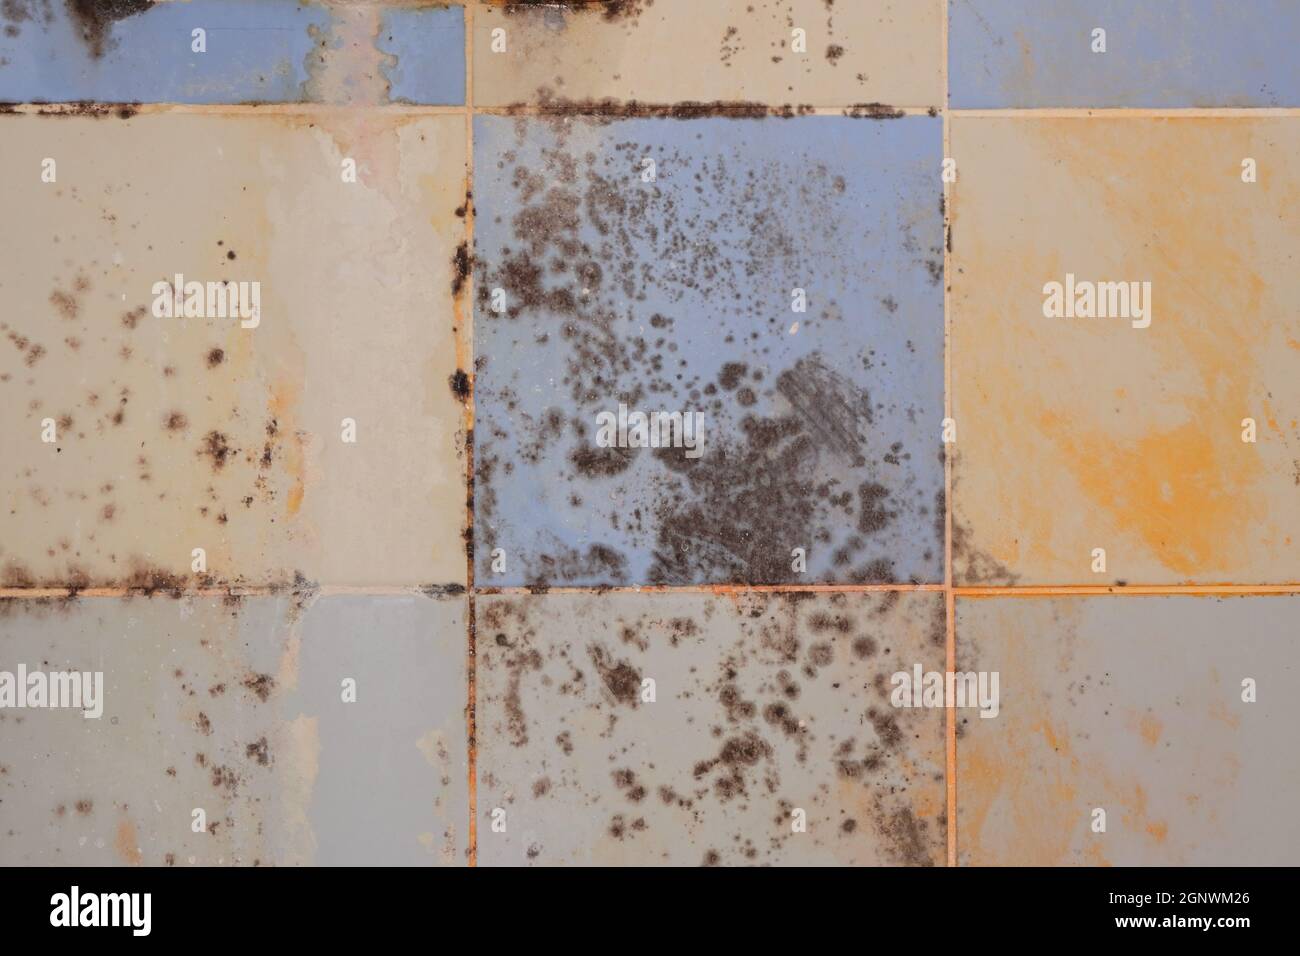 Closeup mold grows and covers surface of tiled wall in bathroom Stock Photo